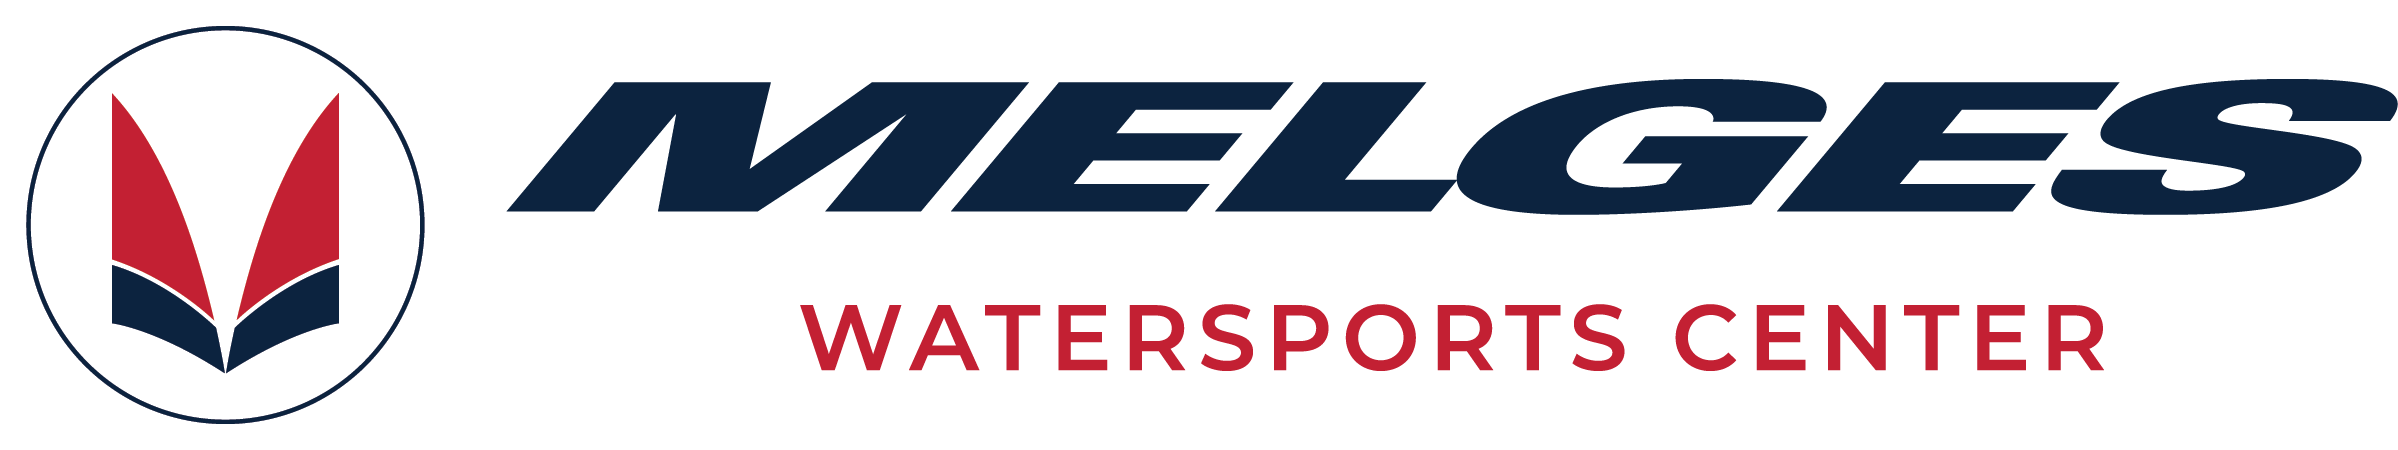 Melges Watersports Center